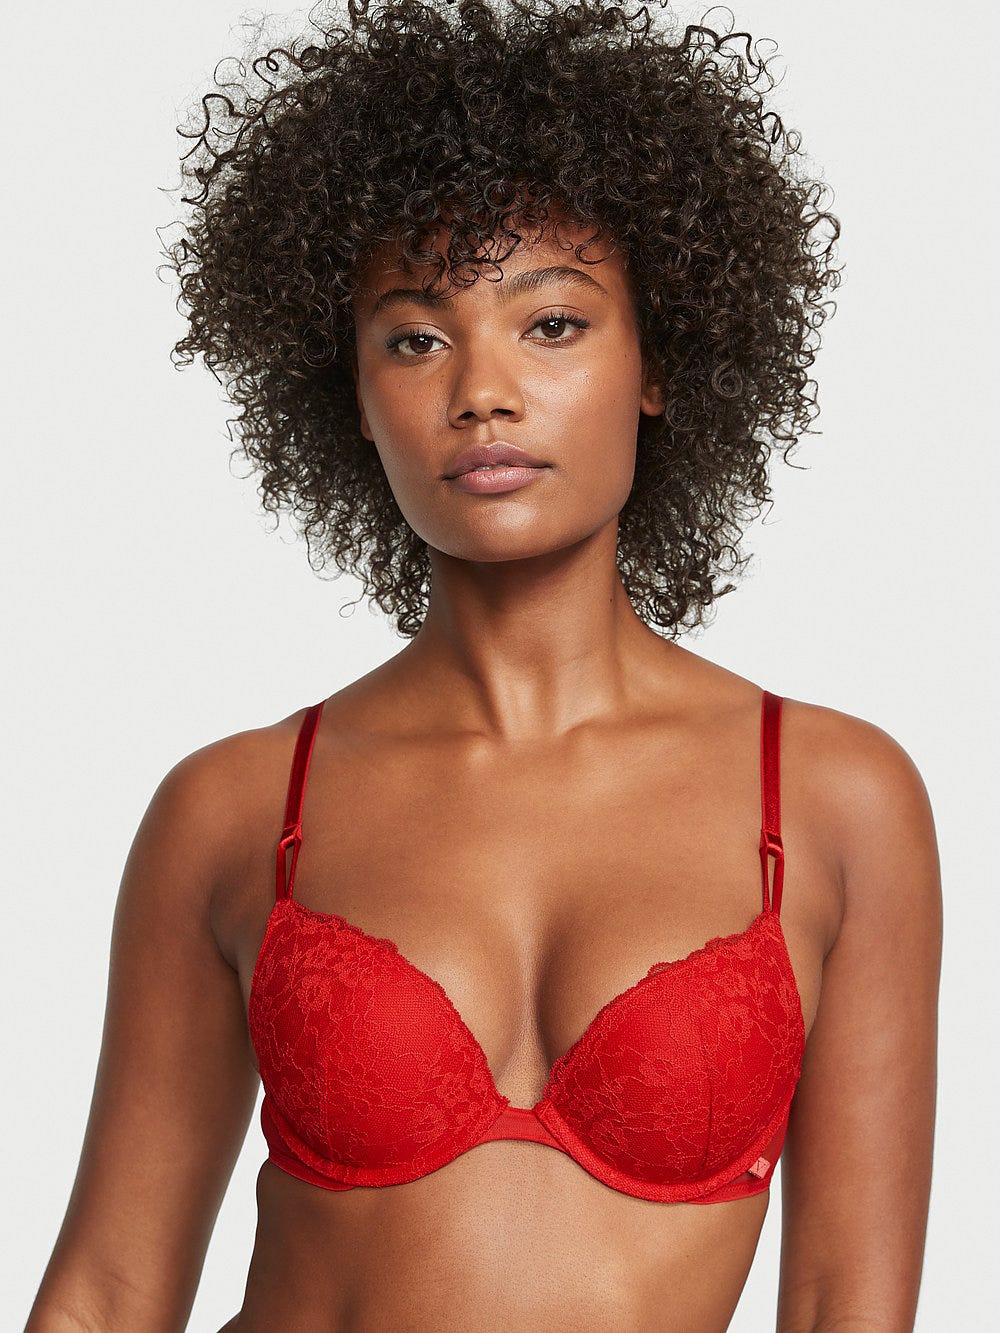 Victoria's Secret, Victoria's Secret Sexy Tee Lace Push-Up Bra, Lipstick, onModelFront, 1 of 3 Ange-Marie is 5'10" and wears 34B or Small